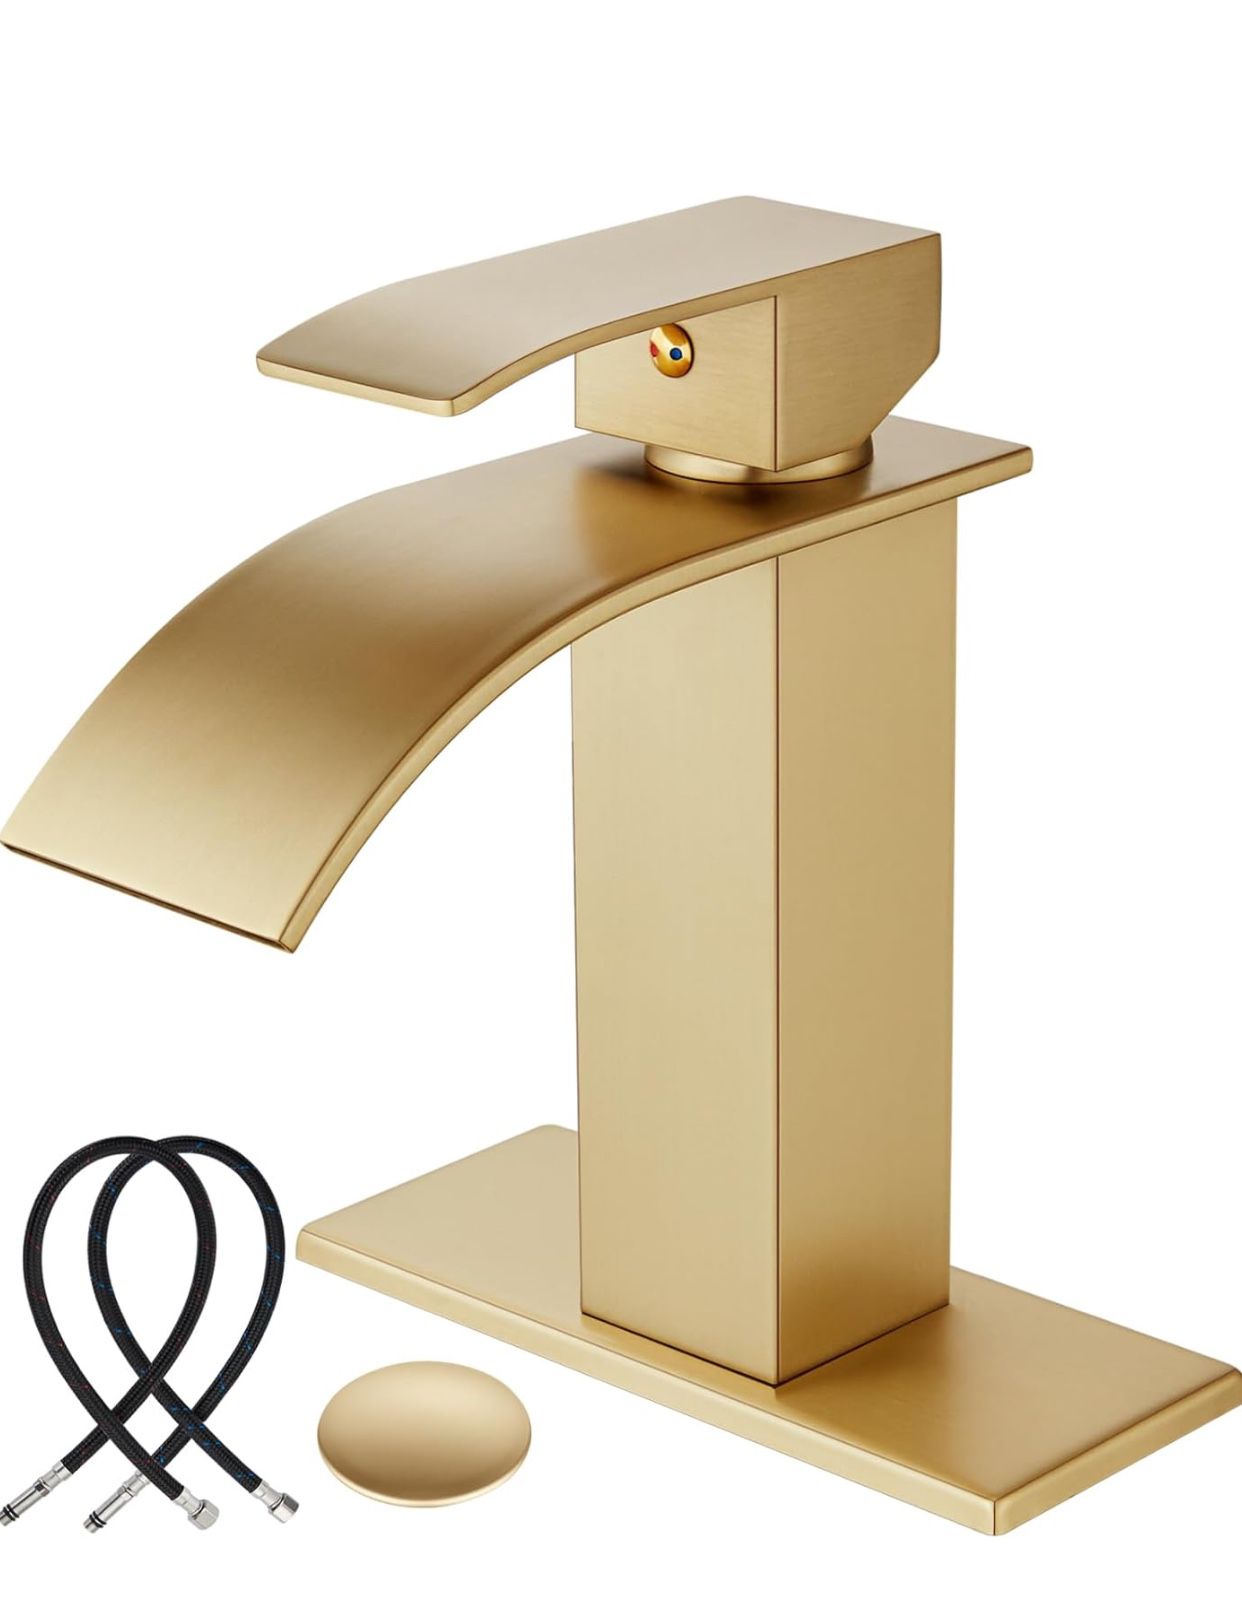 Brushed Gold Bathroom Sink Faucet Waterfall Spout Single Handle 1 Hole Deck Mount Mixer Tap Lavatory Vanity Sink Faucet Commercial with Deck Plate Pop